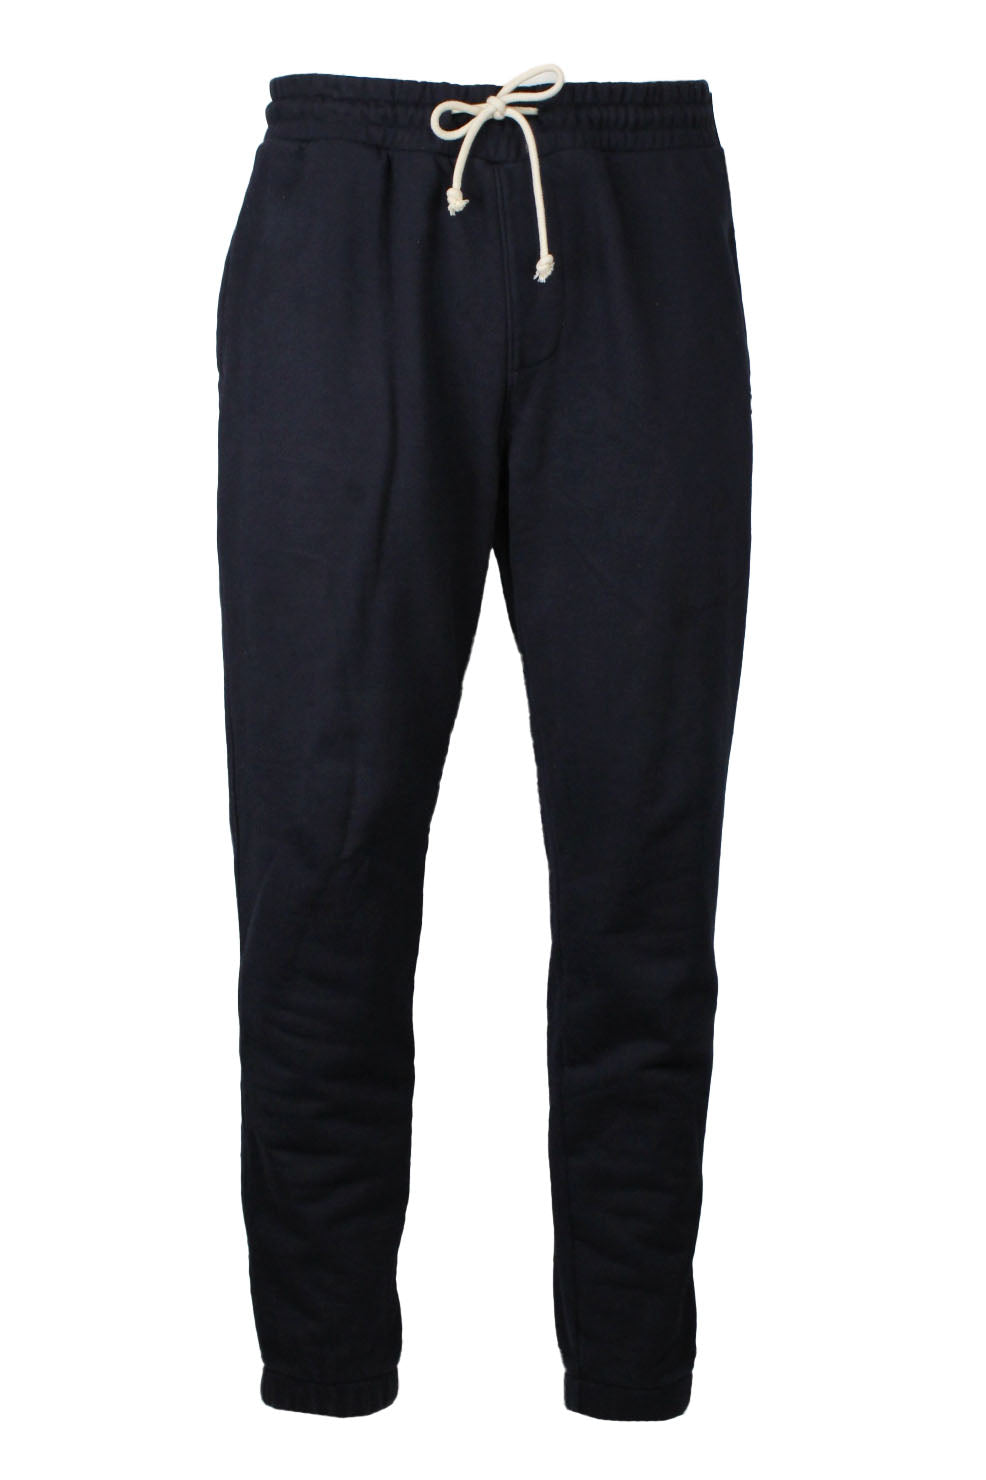 front view of kith navy cotton tapered sweatpants. features ‘kith’ logo patch at front left leg, side hand pockets, rear pocket, ribbed cuffs, and drawstring at elastic waist.